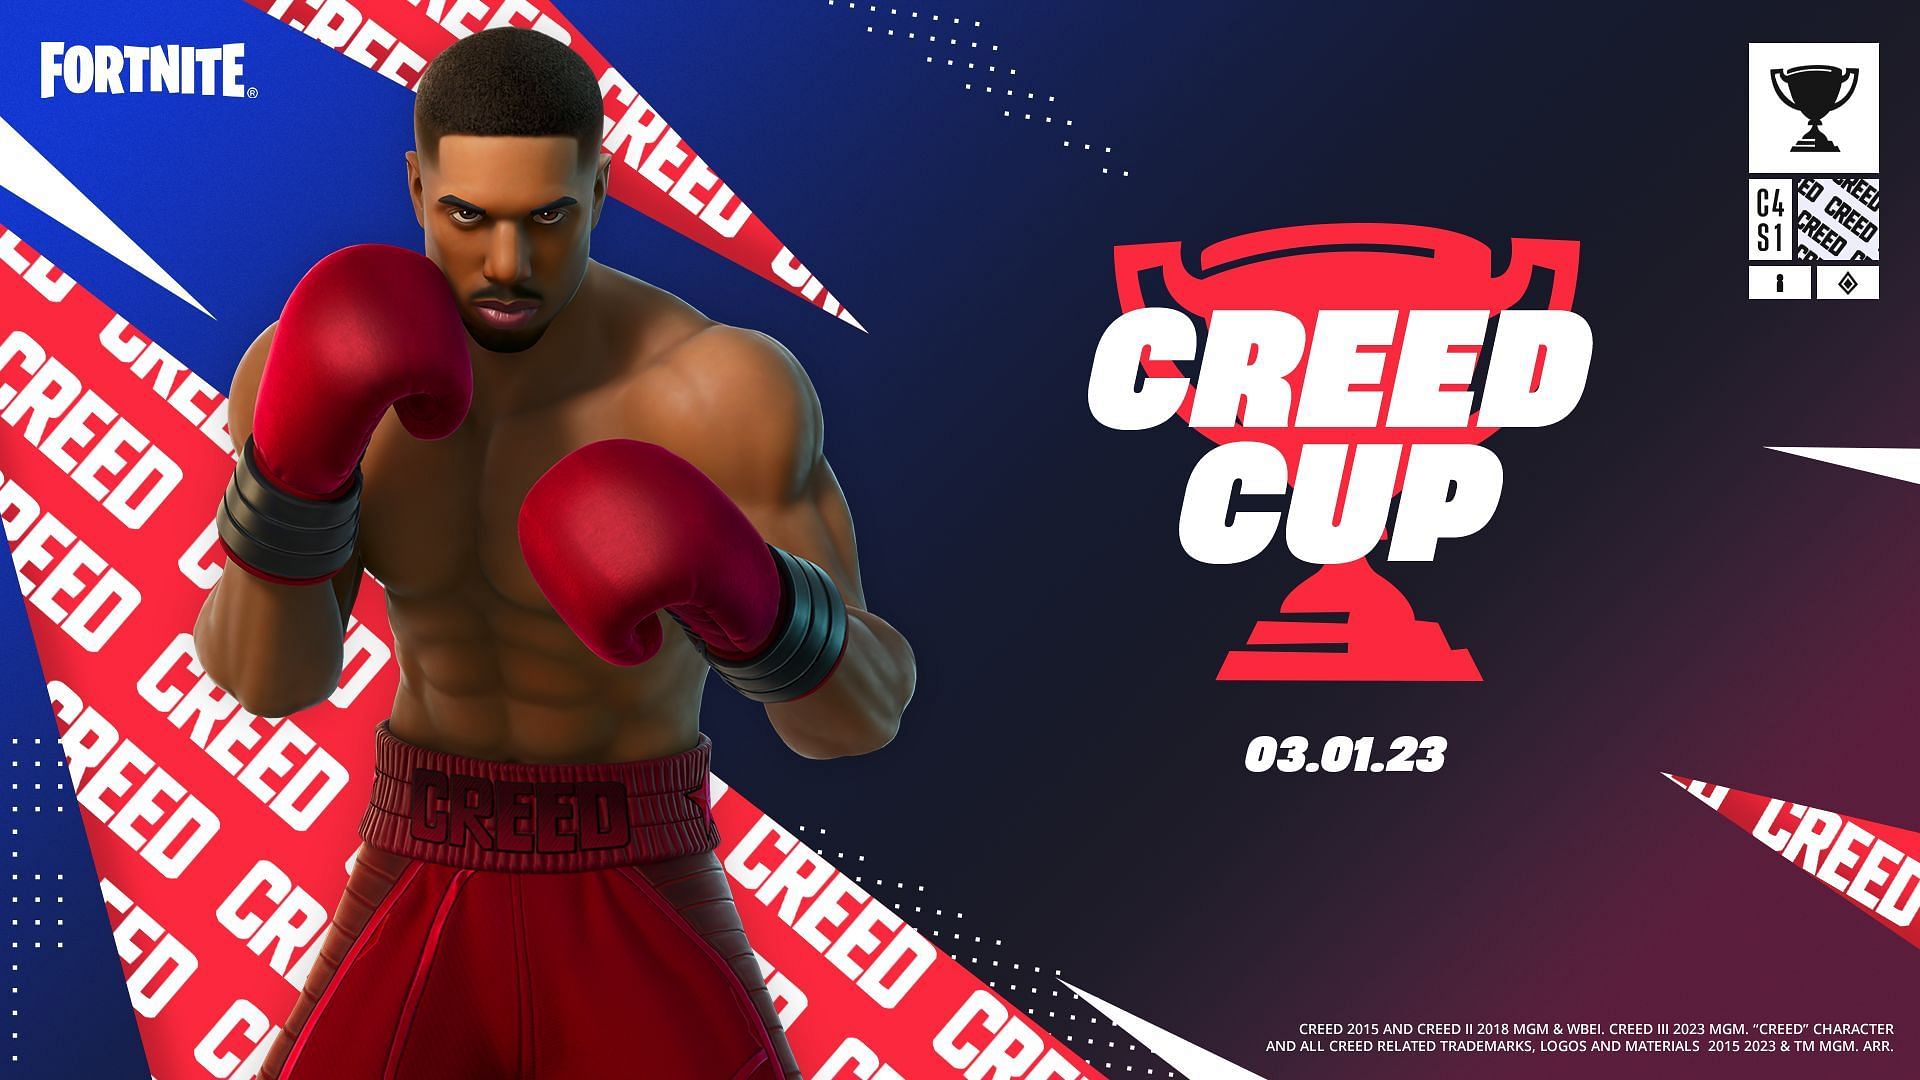 Creed Cup Fortnite